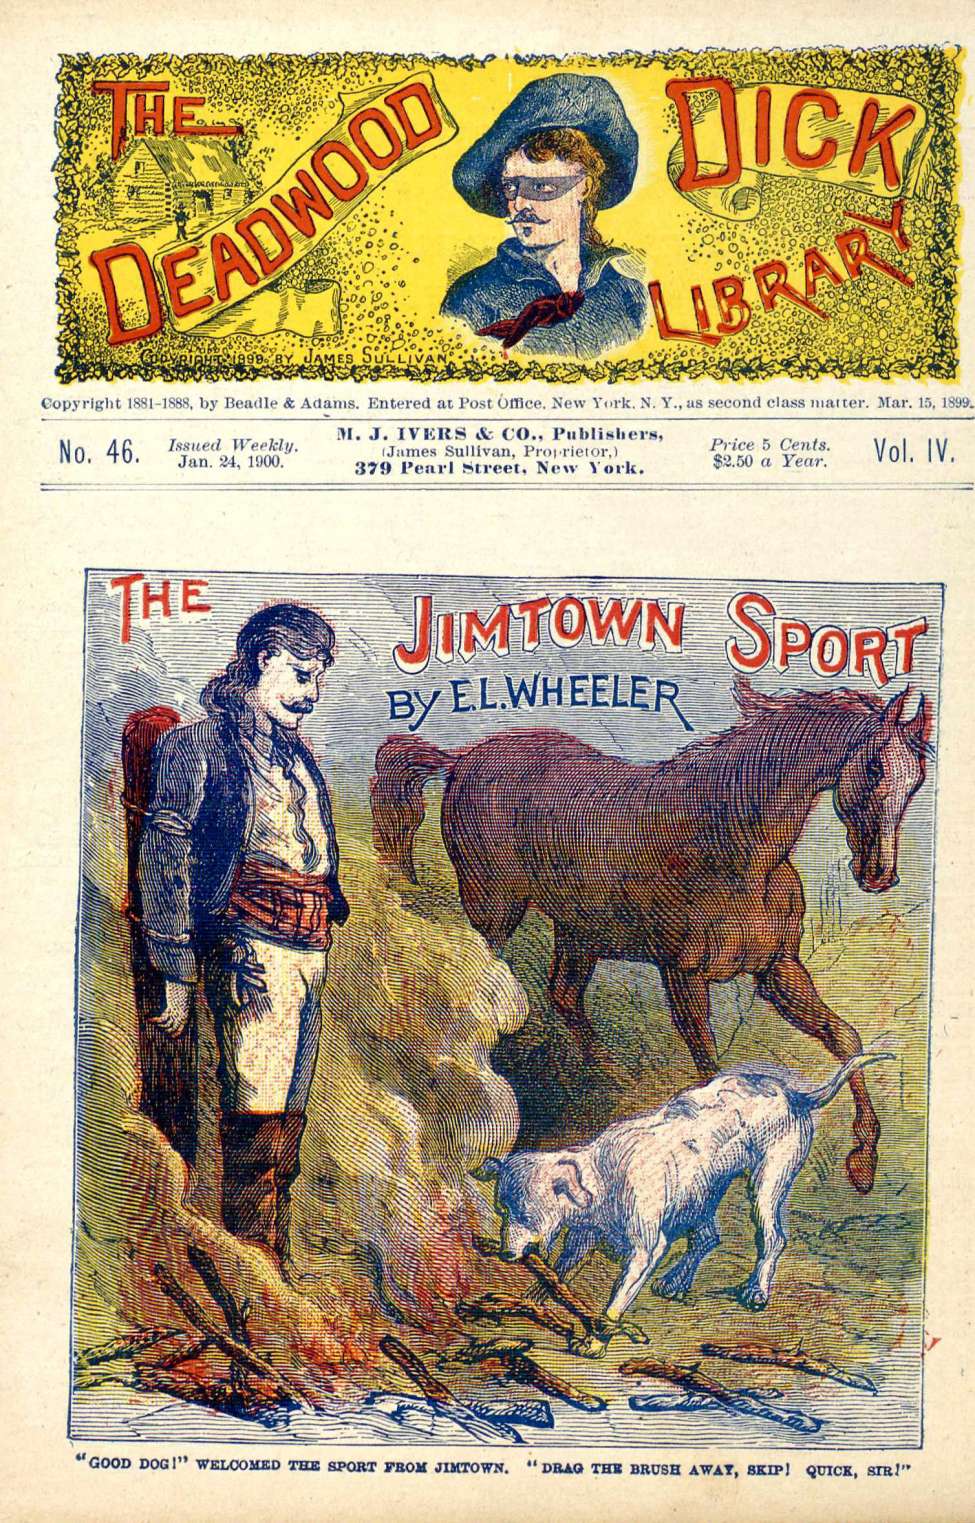 Book Cover For Deadwood Dick Library v4 46 - The Jimtown Sport